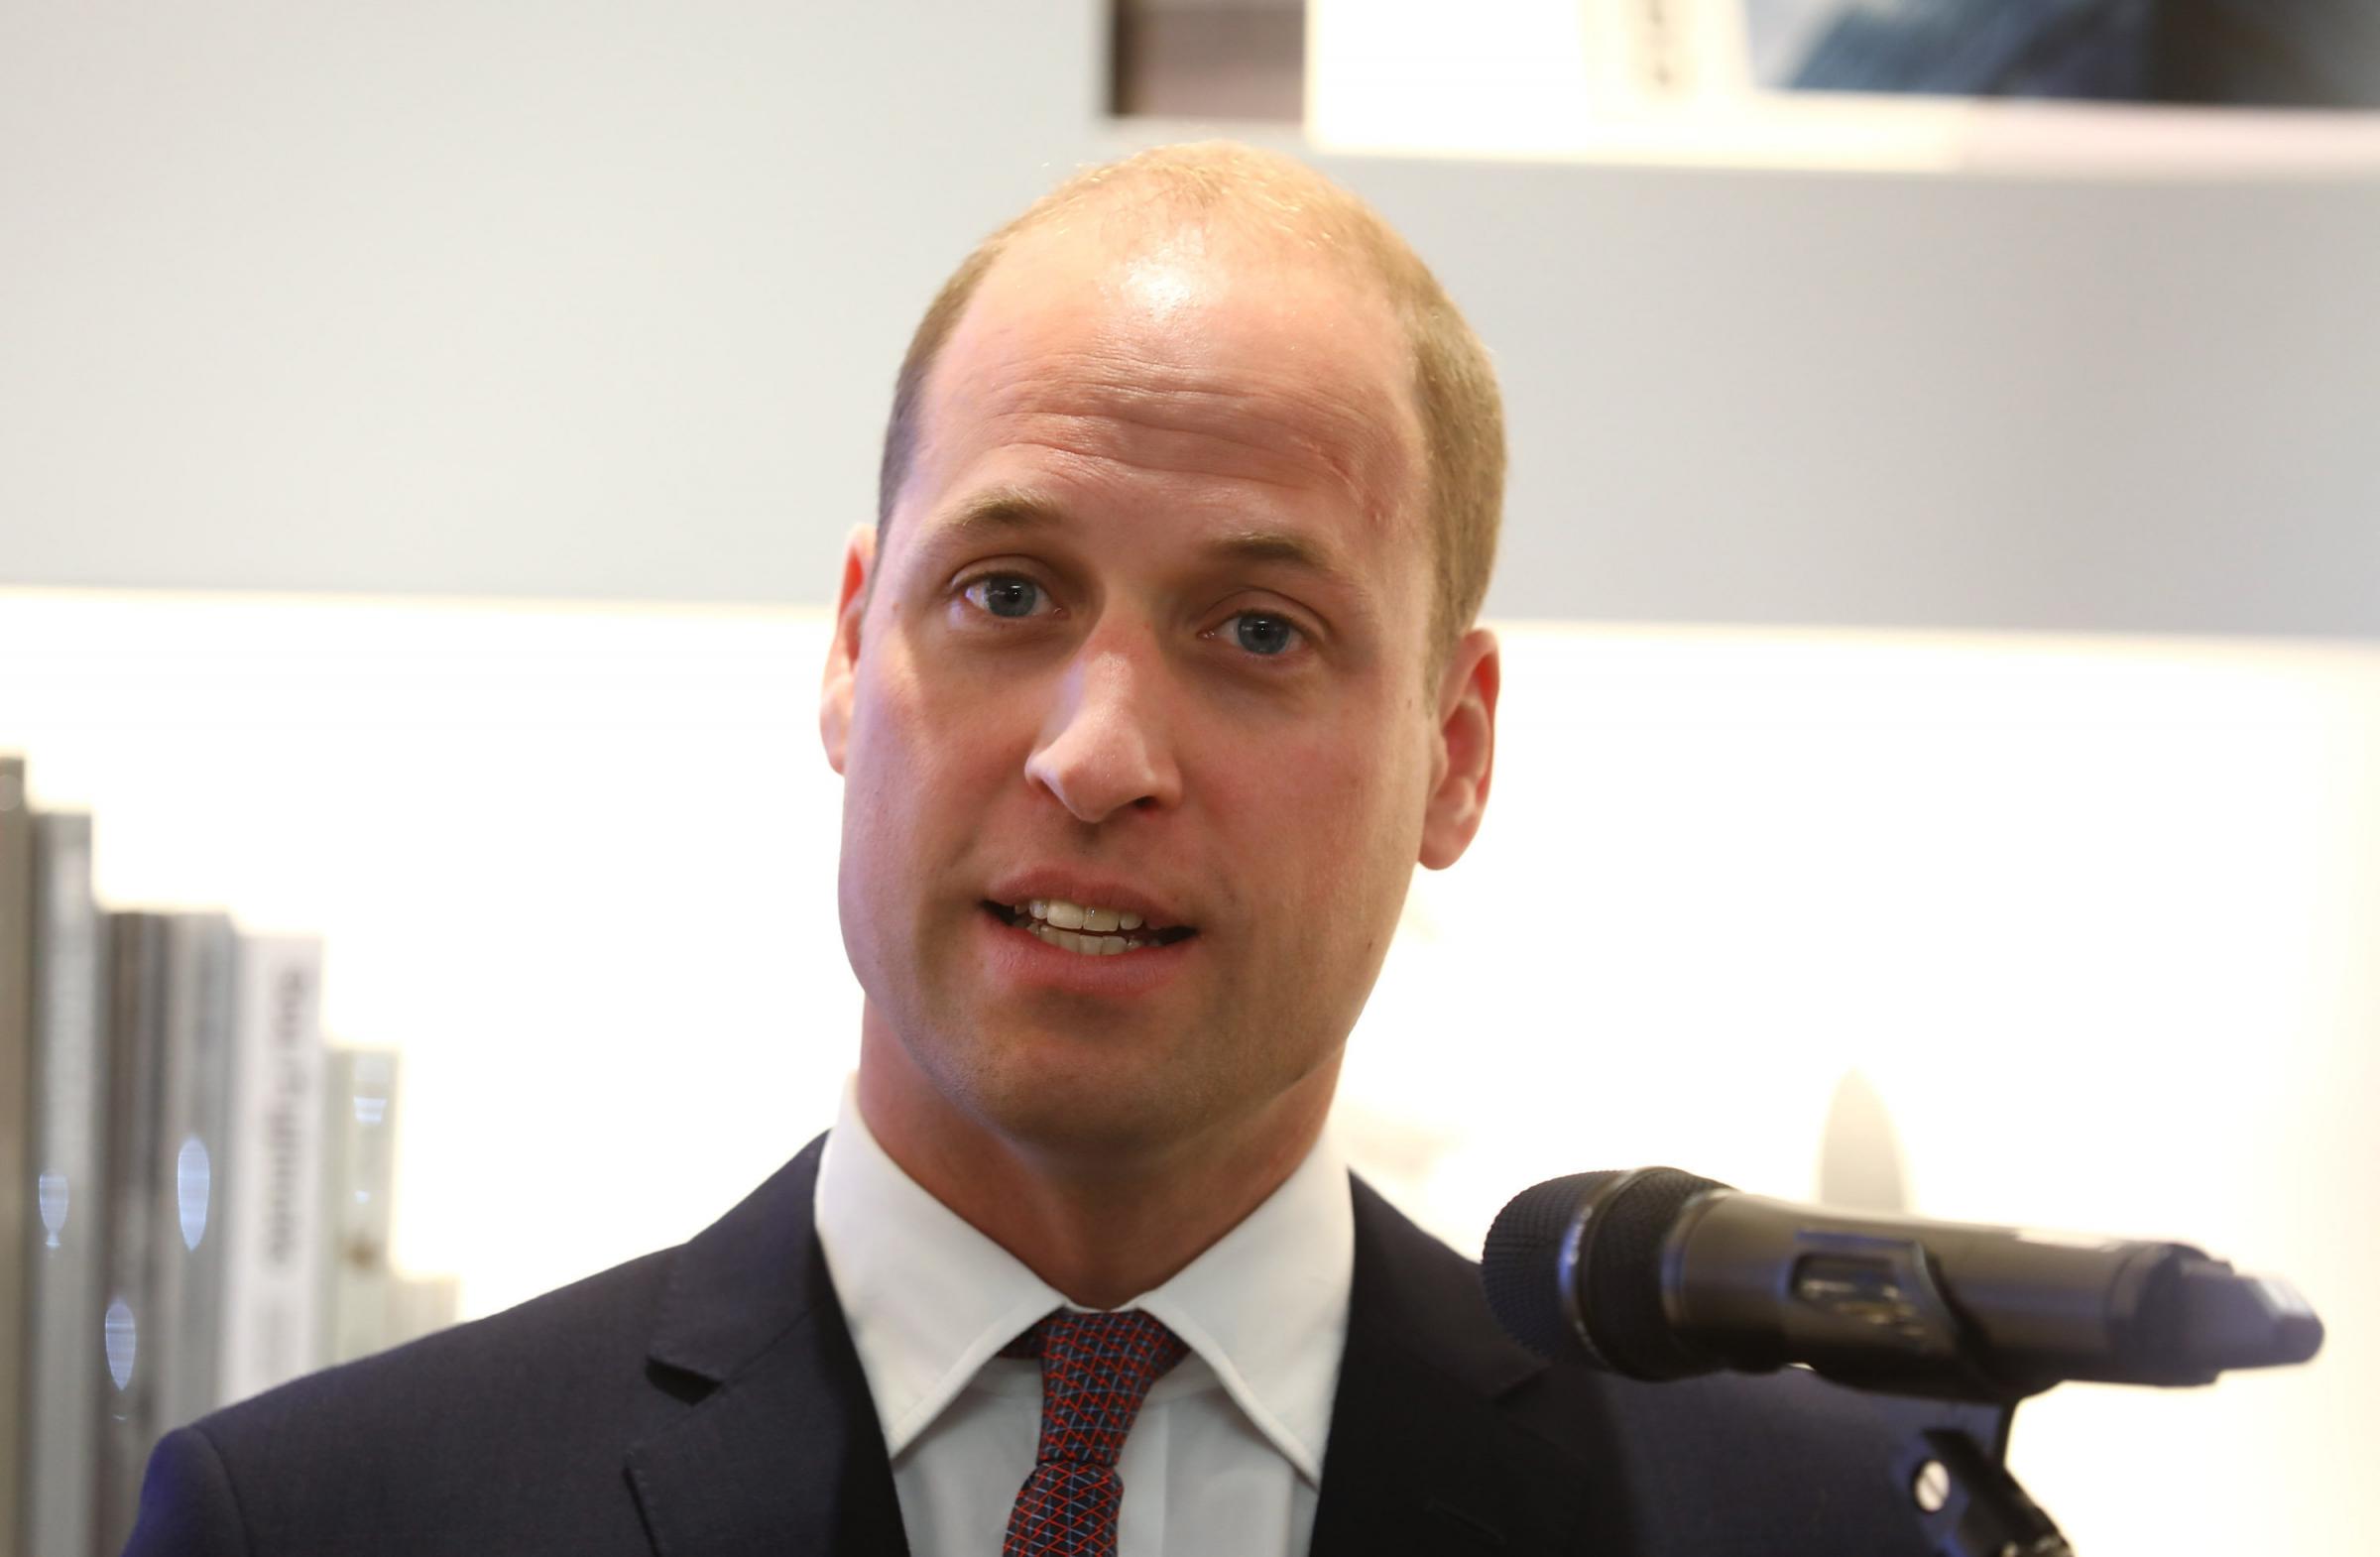 Prince William is wrong — humanity's salvation is in the stars